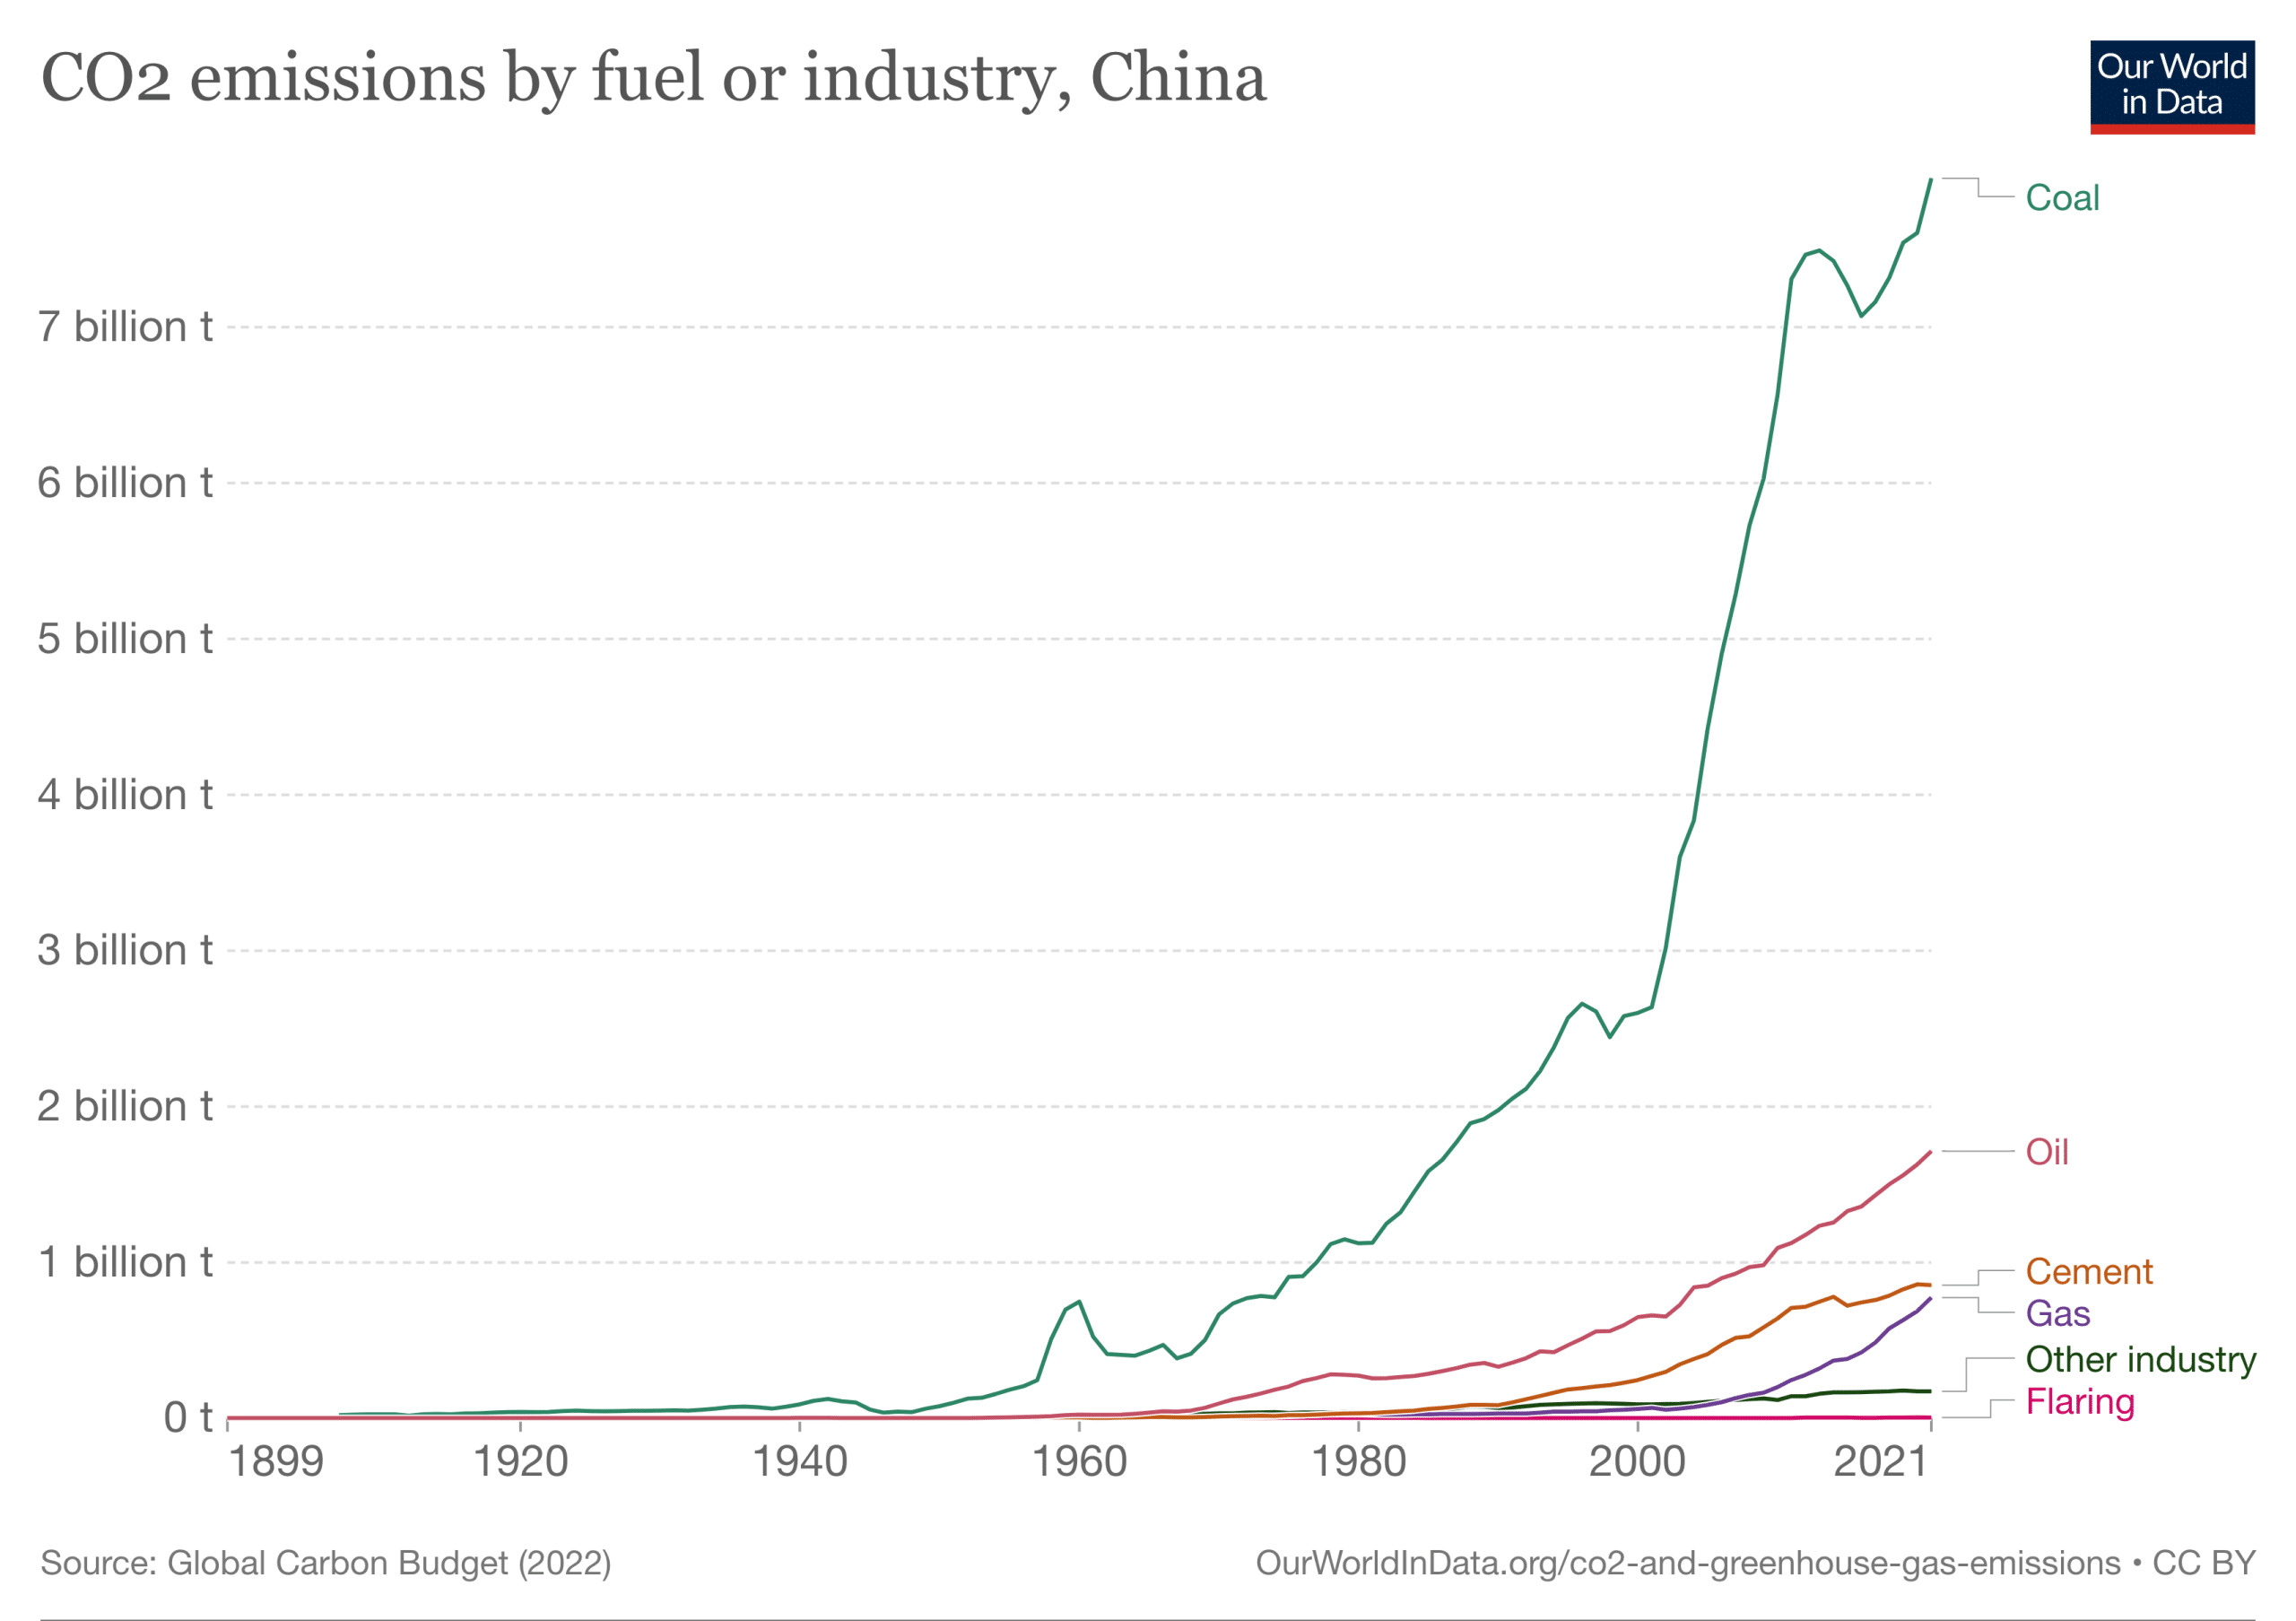 China’s annual carbon dioxide emissions from coal has accelerated in recent decades. Image: Our World In Data.